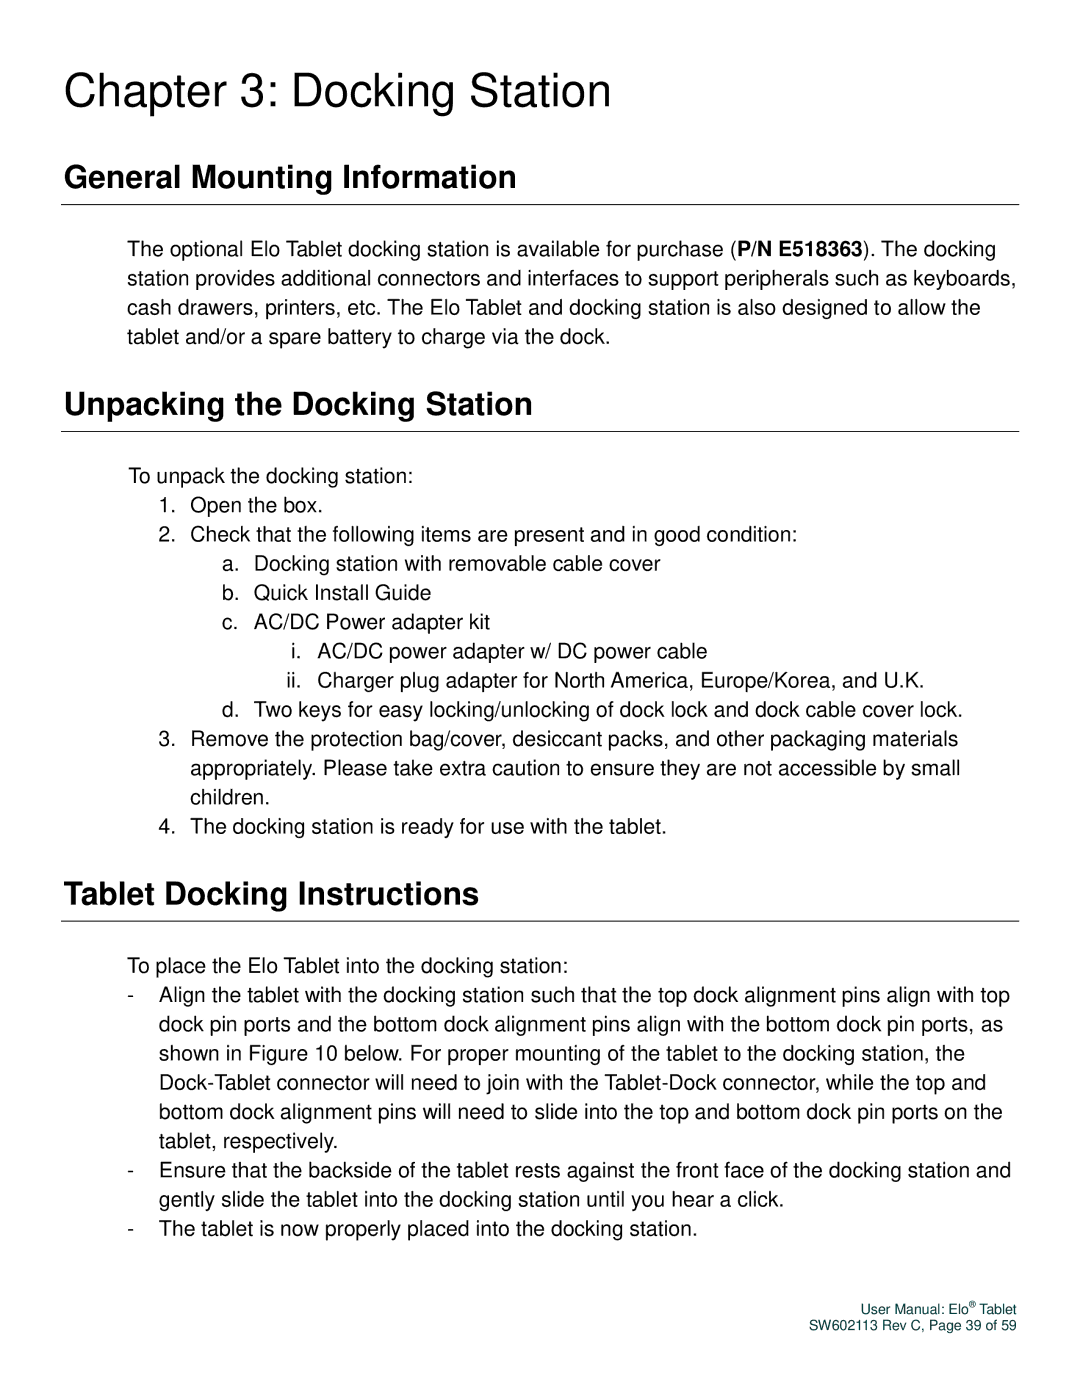 Elo TouchSystems SW602113 General Mounting Information, Unpacking the Docking Station, Tablet Docking Instructions 